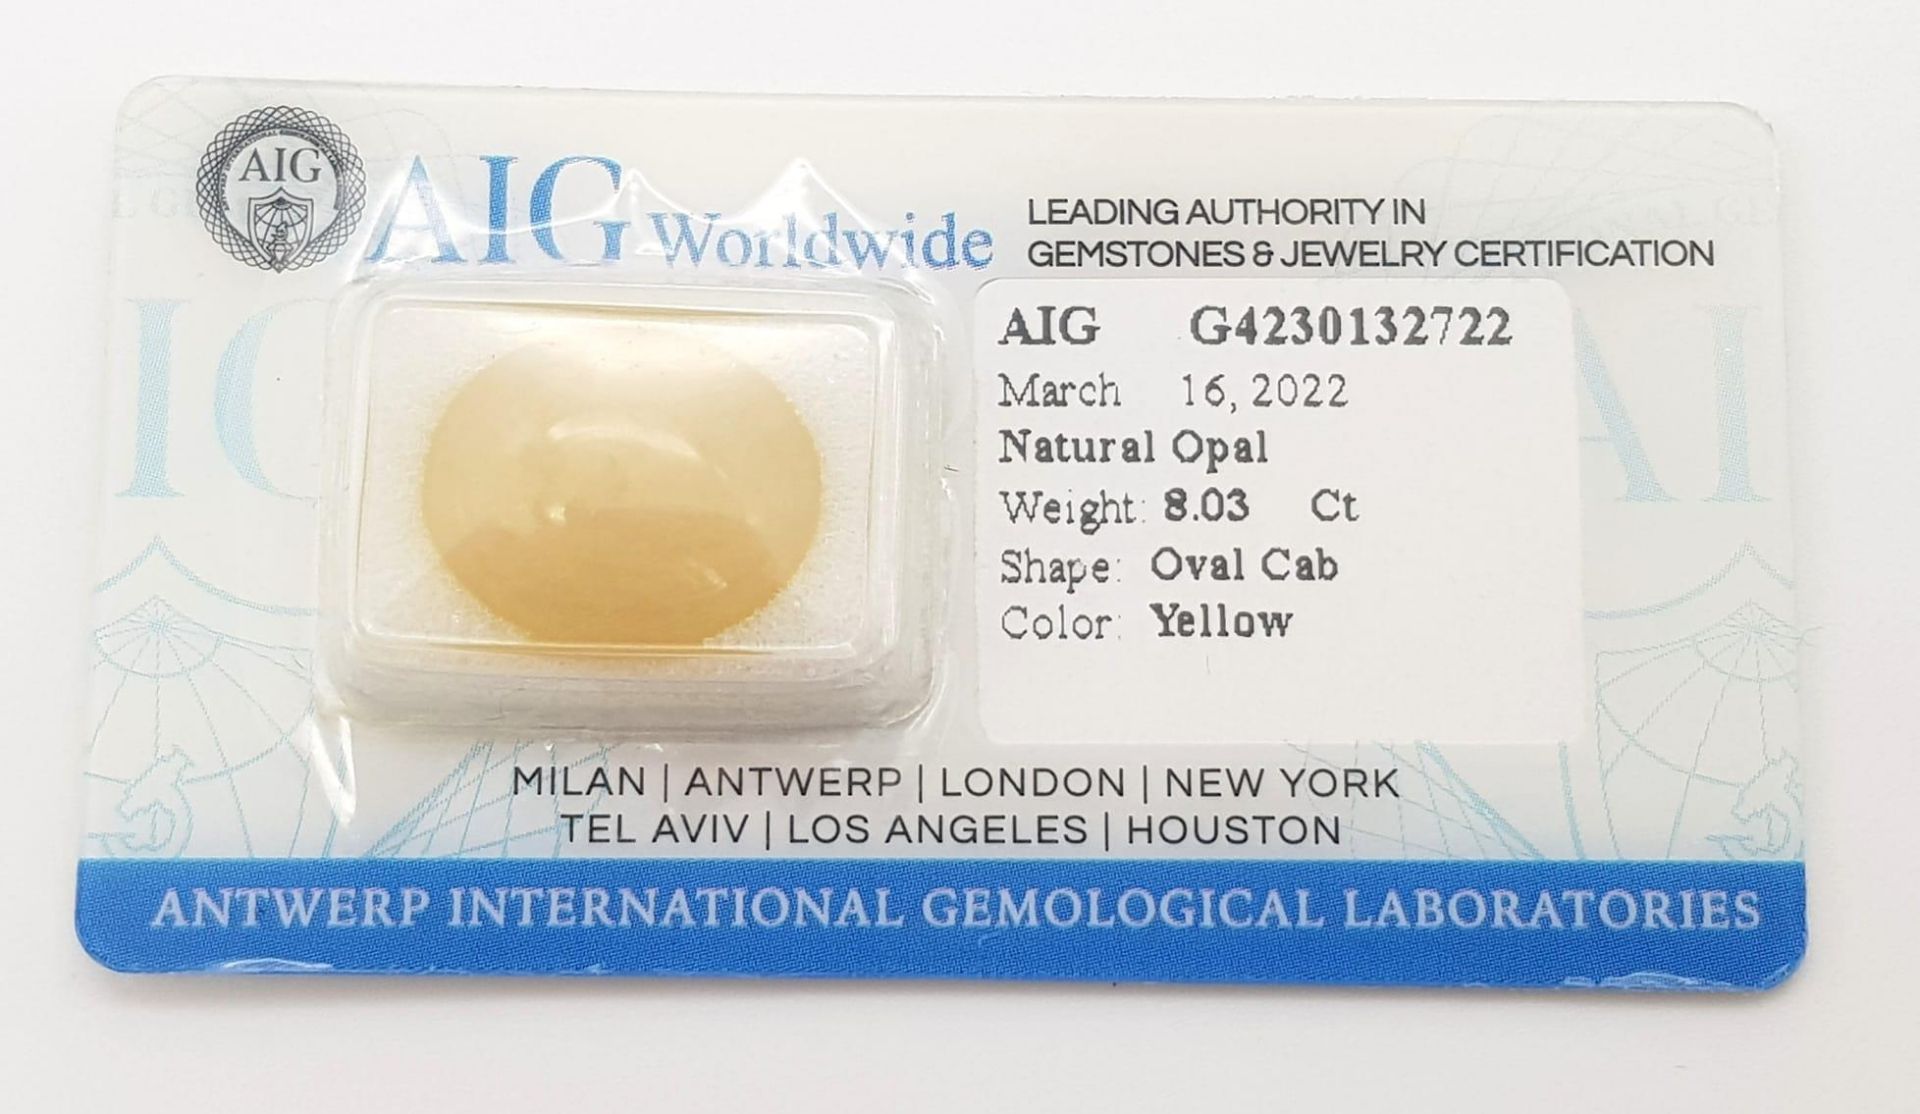 8.03ct Ethiopian Opal Gemstone Sealed with AIG Milan Italian Certification - Image 2 of 4